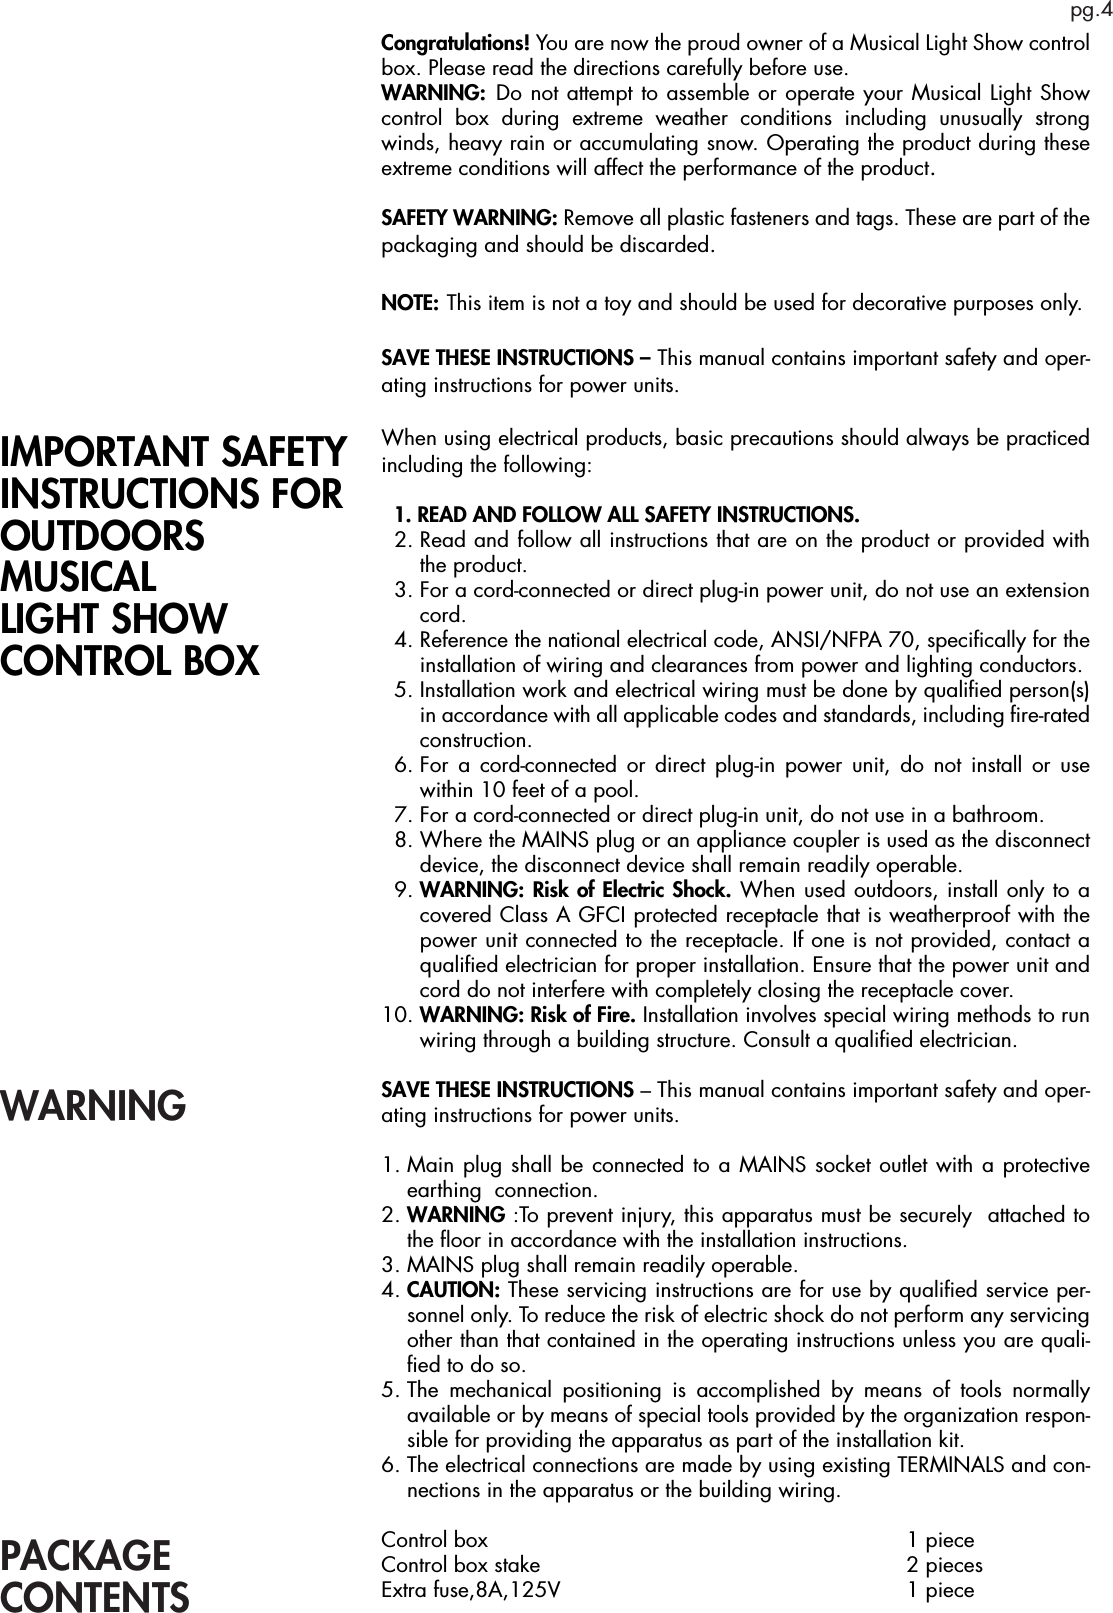 pg.4PACKAGECONTENTSCongratulations! You are now the proud owner of a Musical Light Show control box. Please read the directions carefully before use.WARNING: Do not attempt to assemble or operate your Musical Light Show control box during extreme weather conditions including unusually strong winds, heavy rain or accumulating snow. Operating the product during these extreme conditions will affect the performance of the product. SAFETY WARNING: Remove all plastic fasteners and tags. These are part of the packaging and should be discarded.NOTE: This item is not a toy and should be used for decorative purposes only.SAVE THESE INSTRUCTIONS – This manual contains important safety and oper-ating instructions for power units. When using electrical products, basic precautions should always be practiced including the following:  1. READ AND FOLLOW ALL SAFETY INSTRUCTIONS.  2.  Read and follow all instructions that are on the product or provided with the product.  3.  For a cord-connected or direct plug-in power unit, do not use an extension cord.  4.  Reference the national electrical code, ANSI/NFPA 70, speciﬁcally for the installation of wiring and clearances from power and lighting conductors.  5.  Installation work and electrical wiring must be done by qualiﬁed person(s) in accordance with all applicable codes and standards, including ﬁre-rated construction.  6.  For a cord-connected or direct plug-in power unit, do not install or use within 10 feet of a pool.  7.  For a cord-connected or direct plug-in unit, do not use in a bathroom.  8.  Where the MAINS plug or an appliance coupler is used as the disconnect device, the disconnect device shall remain readily operable.  9.  WARNING: Risk of Electric Shock. When used outdoors, install only to a covered Class A GFCI protected receptacle that is weatherproof with the power unit connected to the receptacle. If one is not provided, contact a qualiﬁed electrician for proper installation. Ensure that the power unit and cord do not interfere with completely closing the receptacle cover.10.  WARNING: Risk of Fire. Installation involves special wiring methods to run wiring through a building structure. Consult a qualiﬁed electrician.SAVE THESE INSTRUCTIONS – This manual contains important safety and oper-ating instructions for power units.1.  Main plug shall be connected to a MAINS socket outlet with a protective earthing  connection.2.  WARNING :To prevent injury, this apparatus must be securely  attached to the ﬂoor in accordance with the installation instructions. 3.  MAINS plug shall remain readily operable. 4.  CAUTION: These servicing instructions are for use by qualiﬁed service per-sonnel only. To reduce the risk of electric shock do not perform any servicing other than that contained in the operating instructions unless you are quali-ﬁed to do so.5.  The mechanical positioning is accomplished by means of tools normally available or by means of special tools provided by the organization respon-sible for providing the apparatus as part of the installation kit.6.  The electrical connections are made by using existing TERMINALS and con-nections in the apparatus or the building wiring.Control box      1 pieceControl box stake     2 piecesExtra fuse,8A,125V     1 pieceIMPORTANT SAFETY INSTRUCTIONS FOROUTDOORS MUSICAL LIGHT SHOW CONTROL BOX WARNING